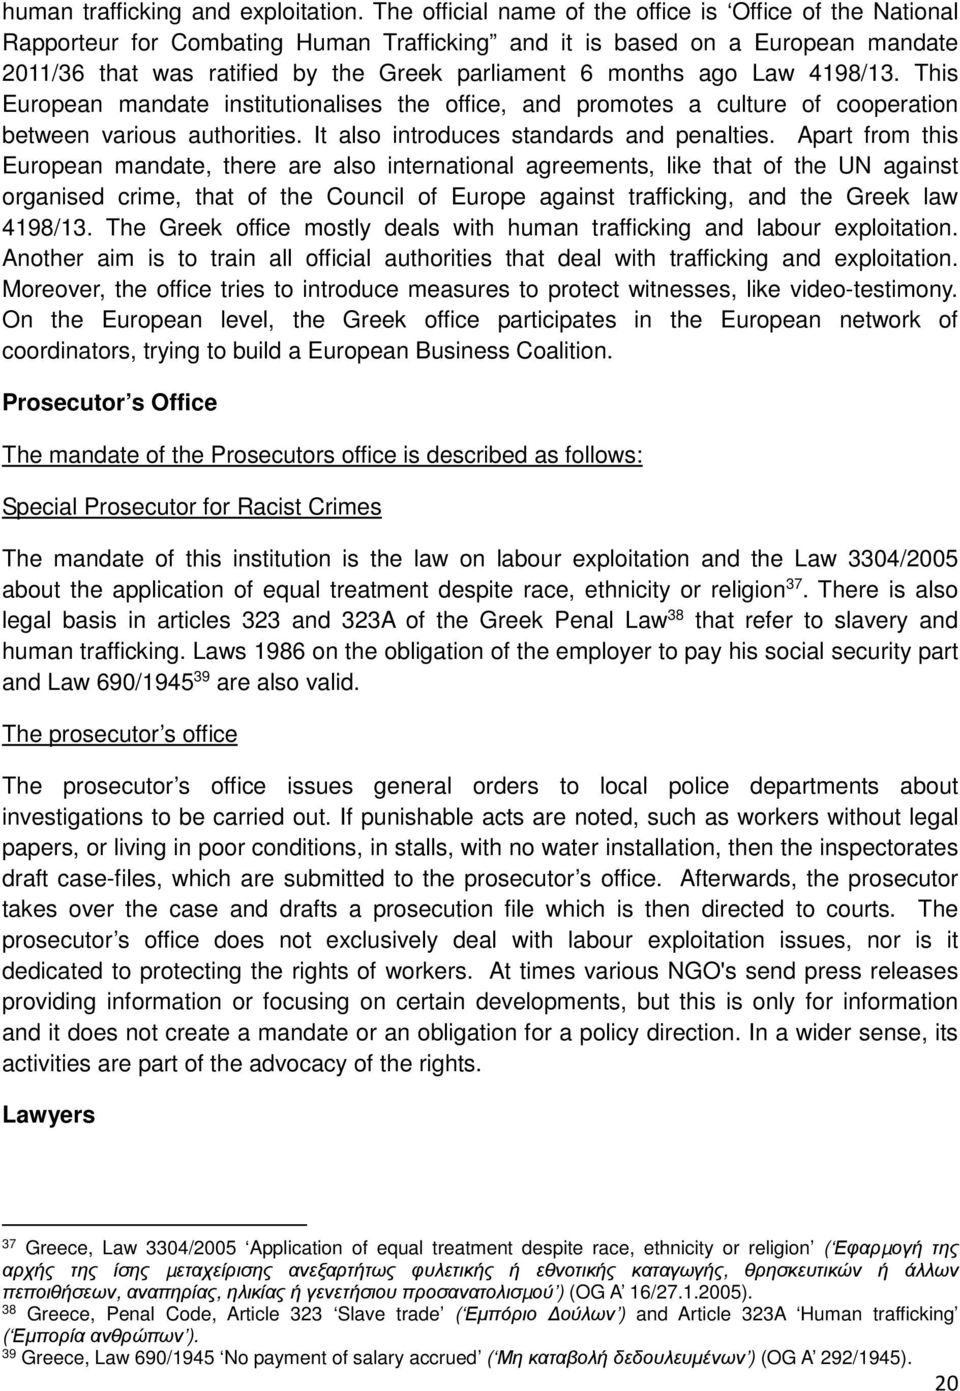 ago Law 4198/13. This European mandate institutionalises the office, and promotes a culture of cooperation between various authorities. It also introduces standards and penalties.